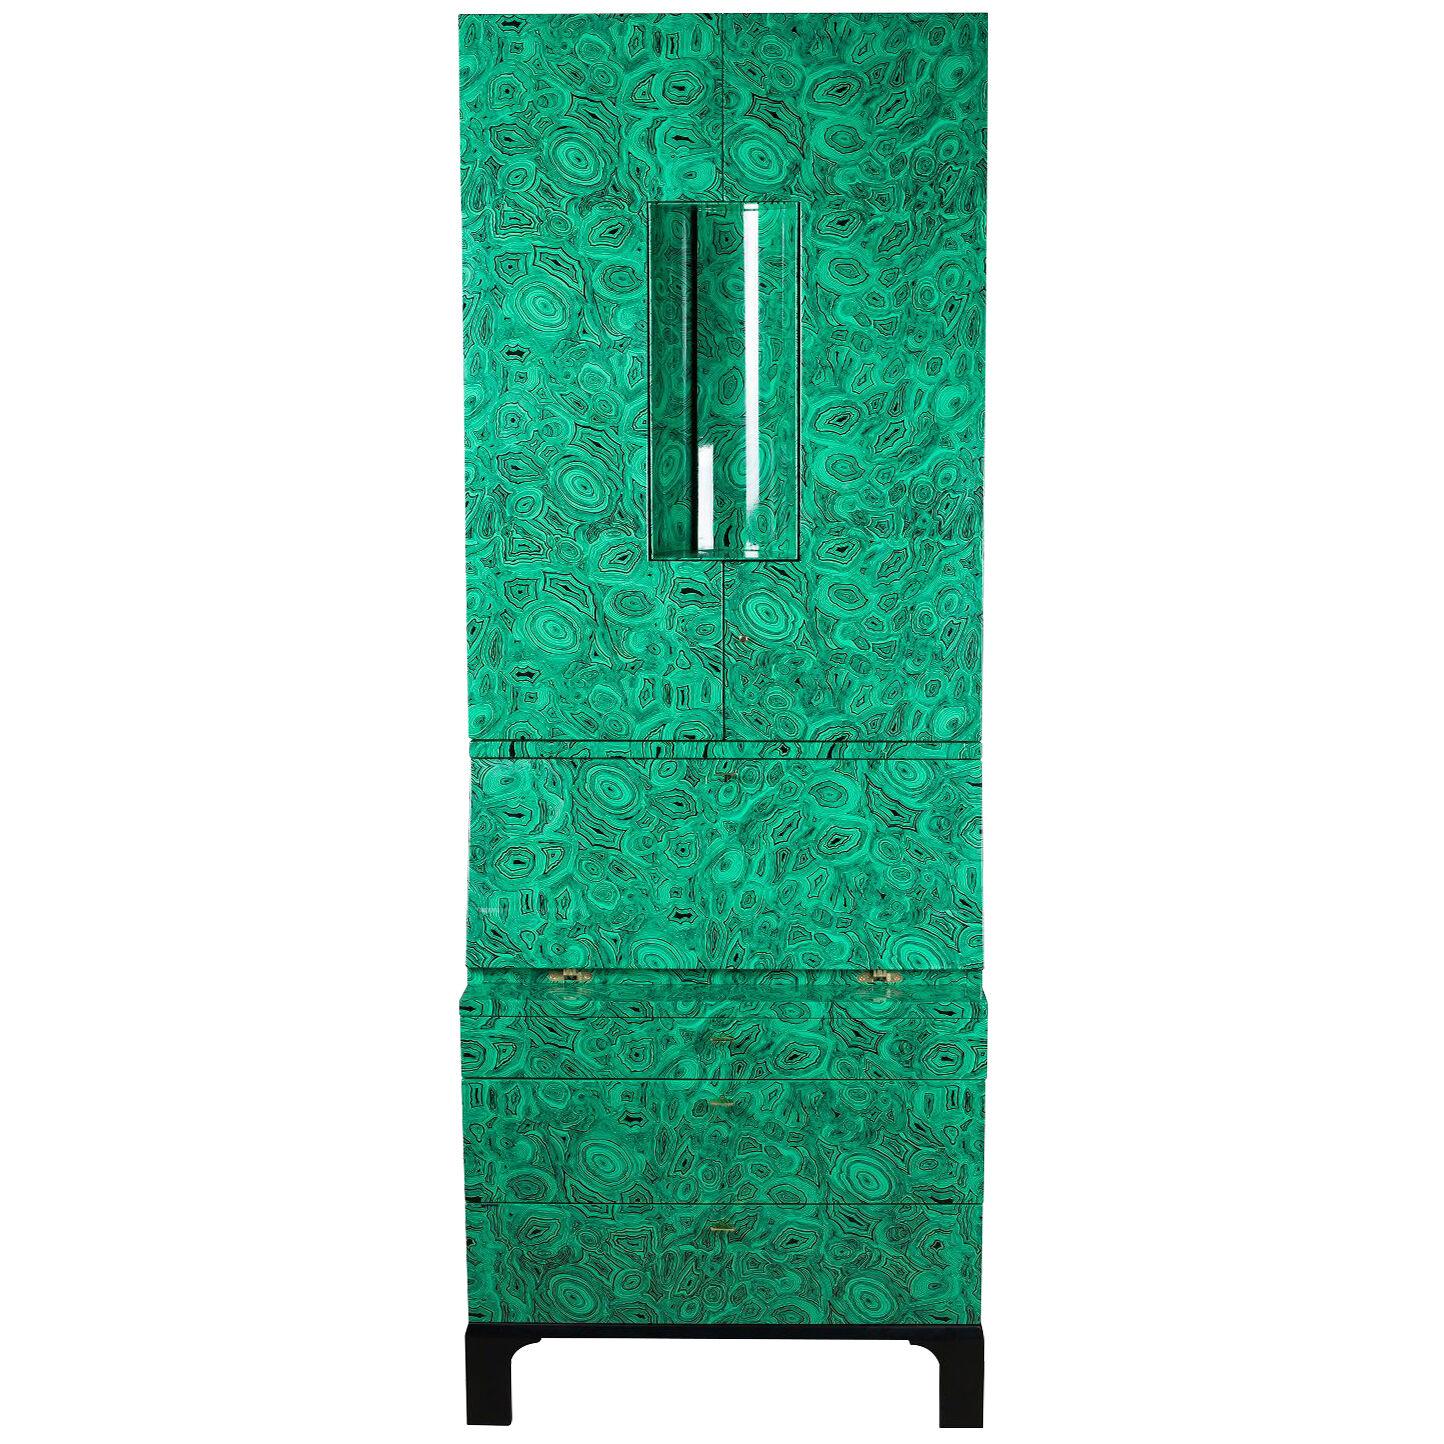 Limited Edition Fornasetti "Malachite" Cabinet by Barnaba Fornasetti